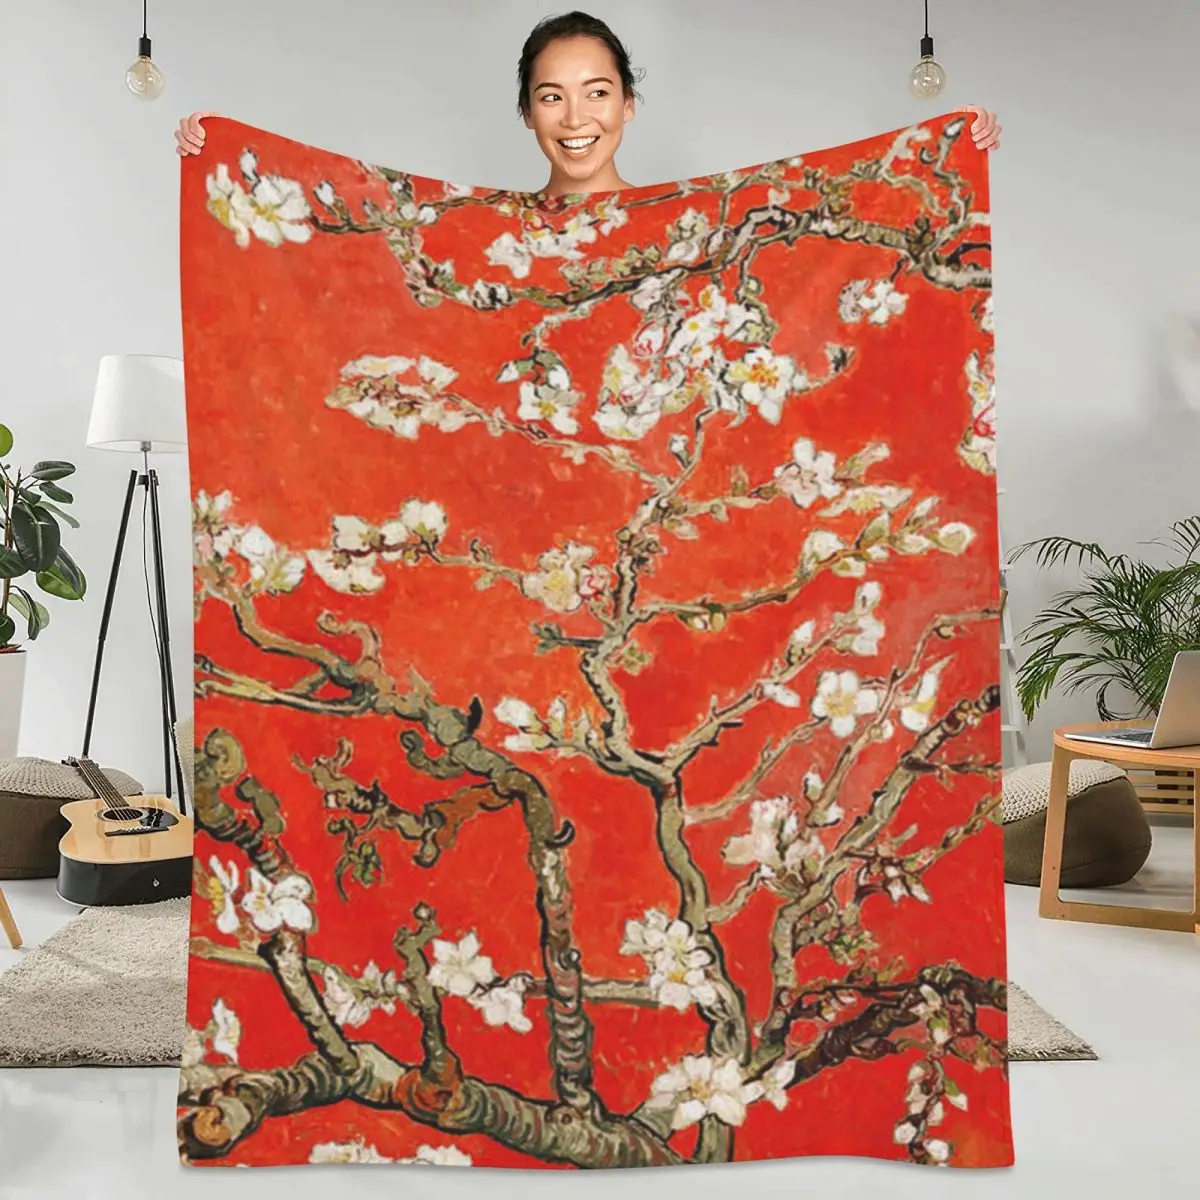 

Vincent Van Gogh Blanket Red Almond Blossoms Travel Office Flannel Throw Blanket Soft Warm Couch Bed Custom Bedspread Gift Idea